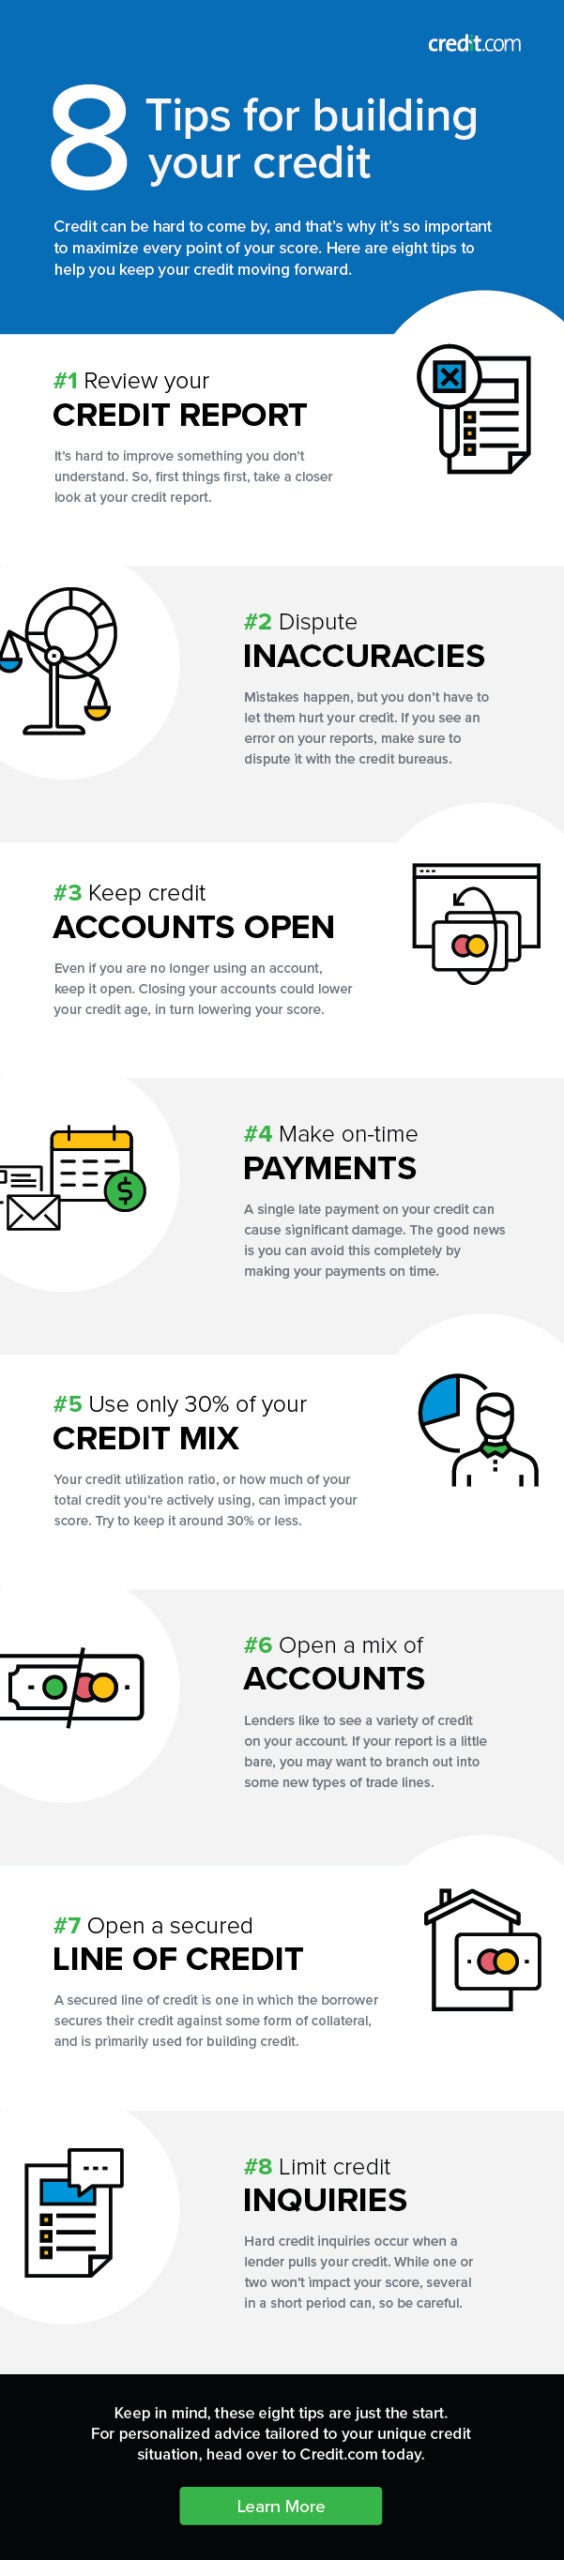 Credit building tips